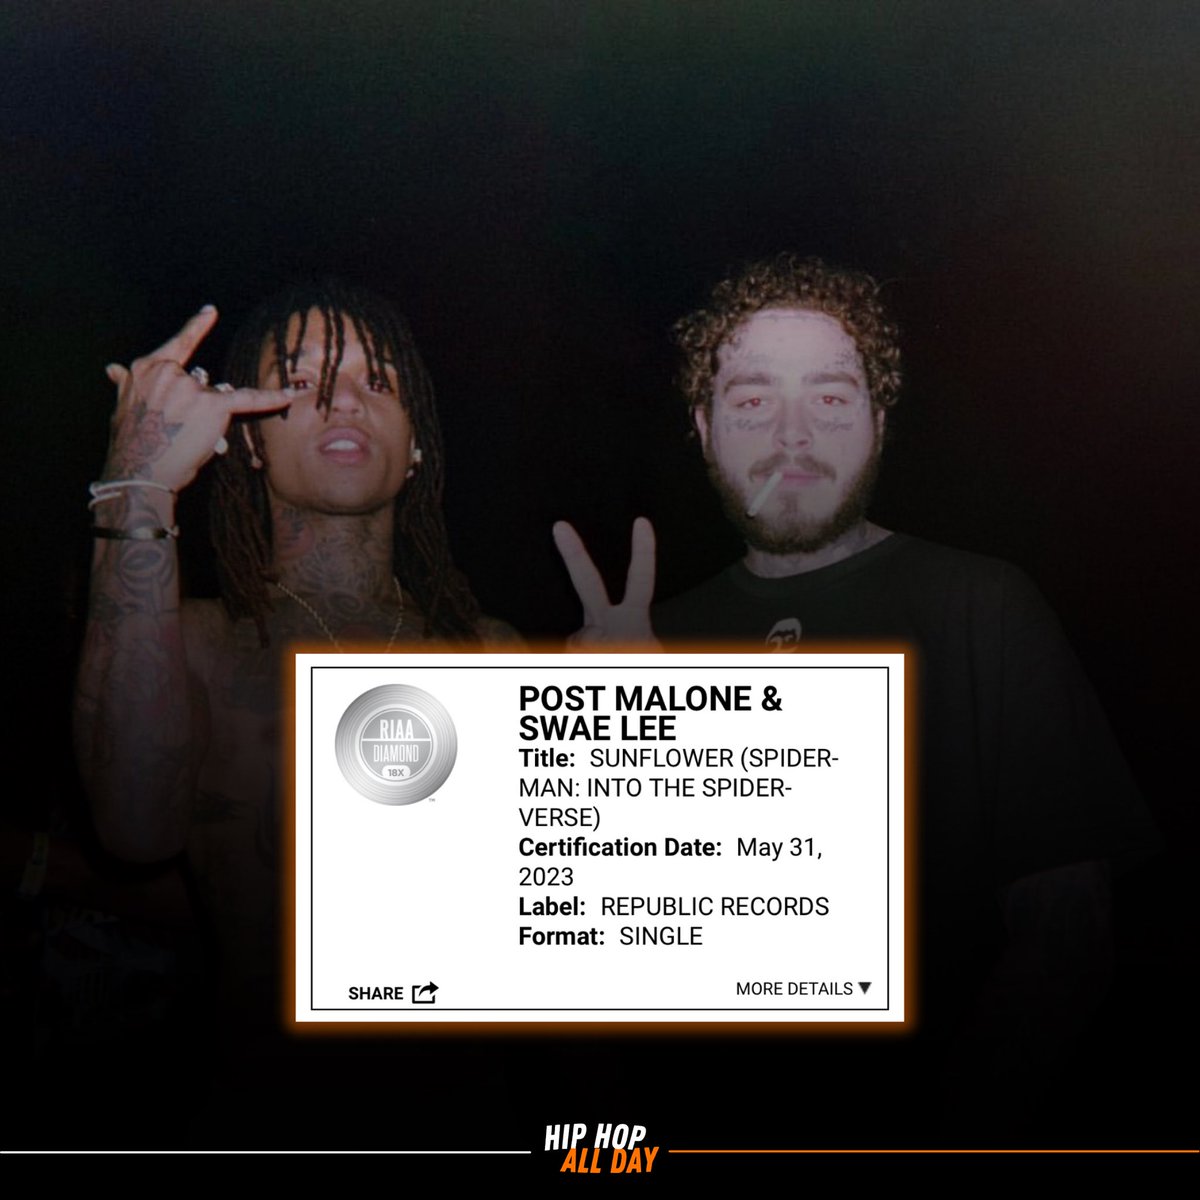 Post Malone & Swae Lee’s “Sunflower” is now officially 18x platinum 🤯🔥 It is now the HIGHEST certified song EVER!